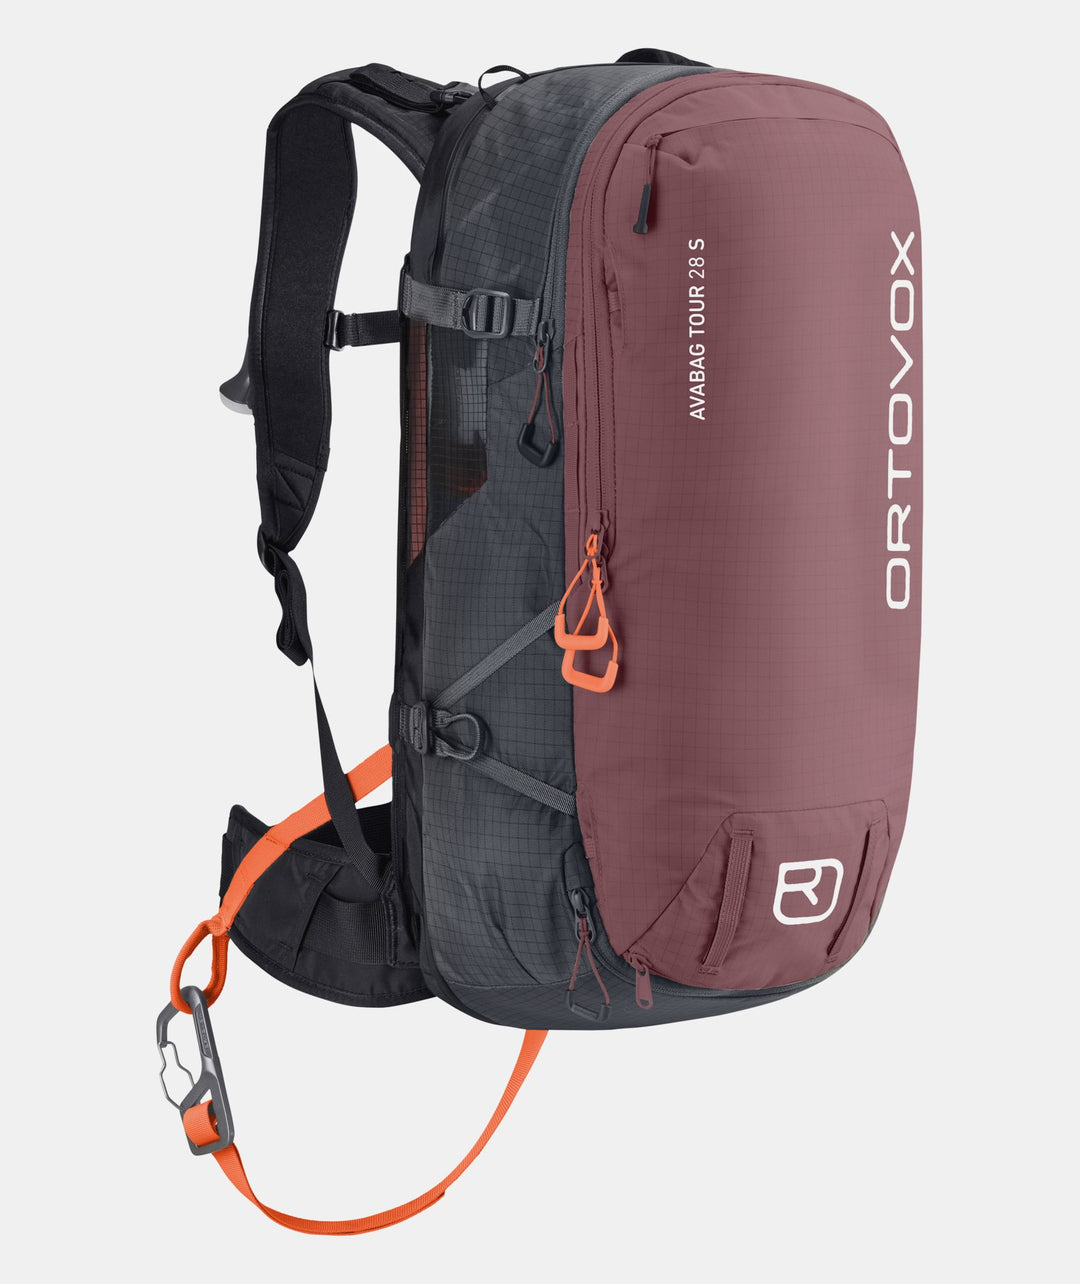 Boone Mountain Sports - AVABAG LITRIC TOUR 28S